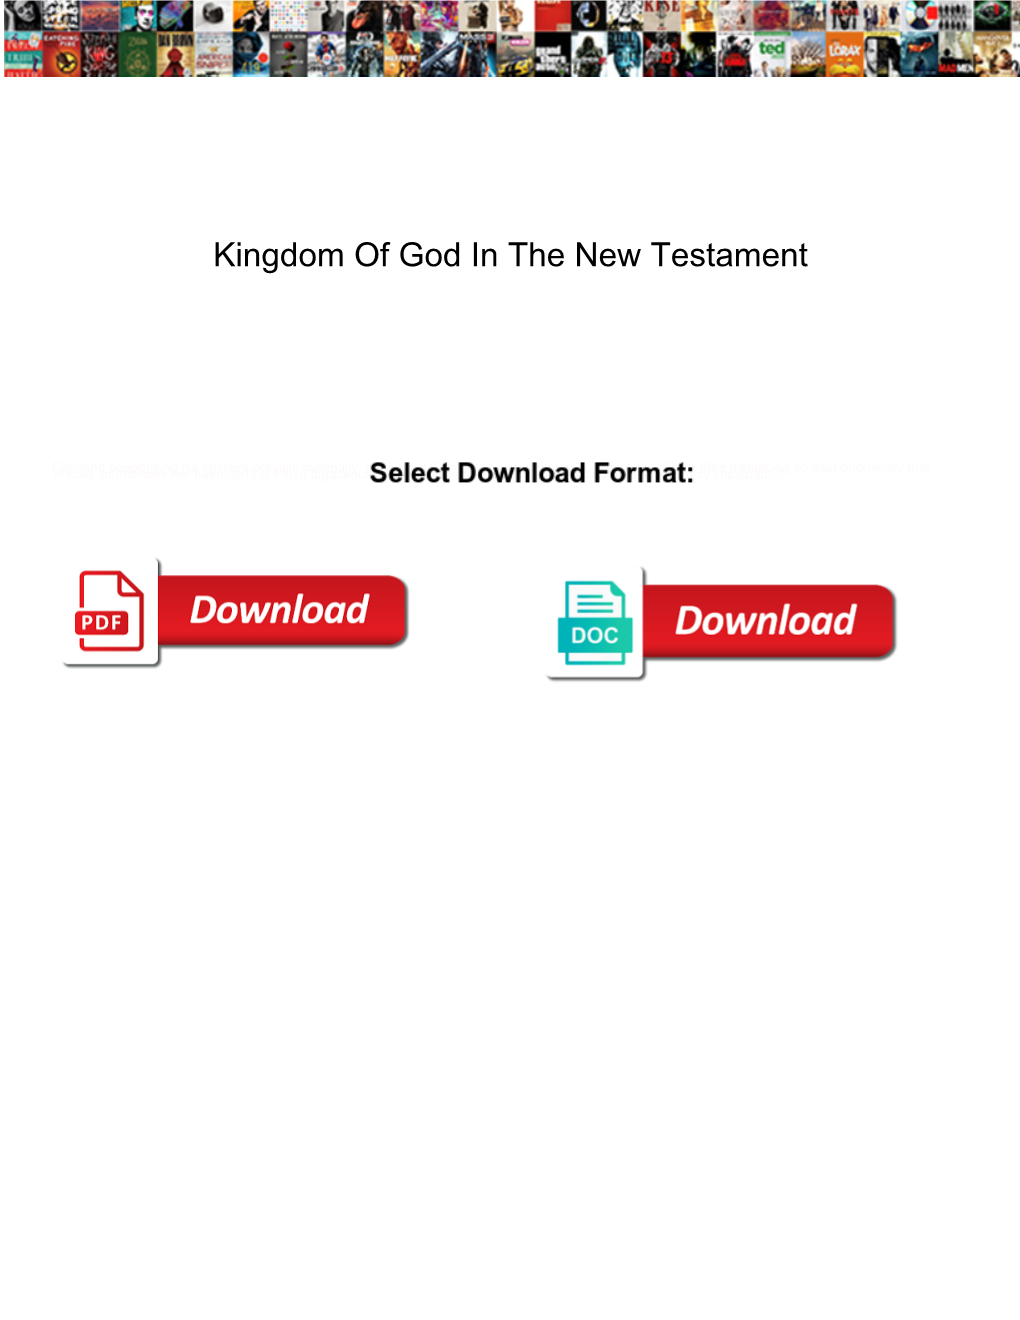 Kingdom of God in the New Testament